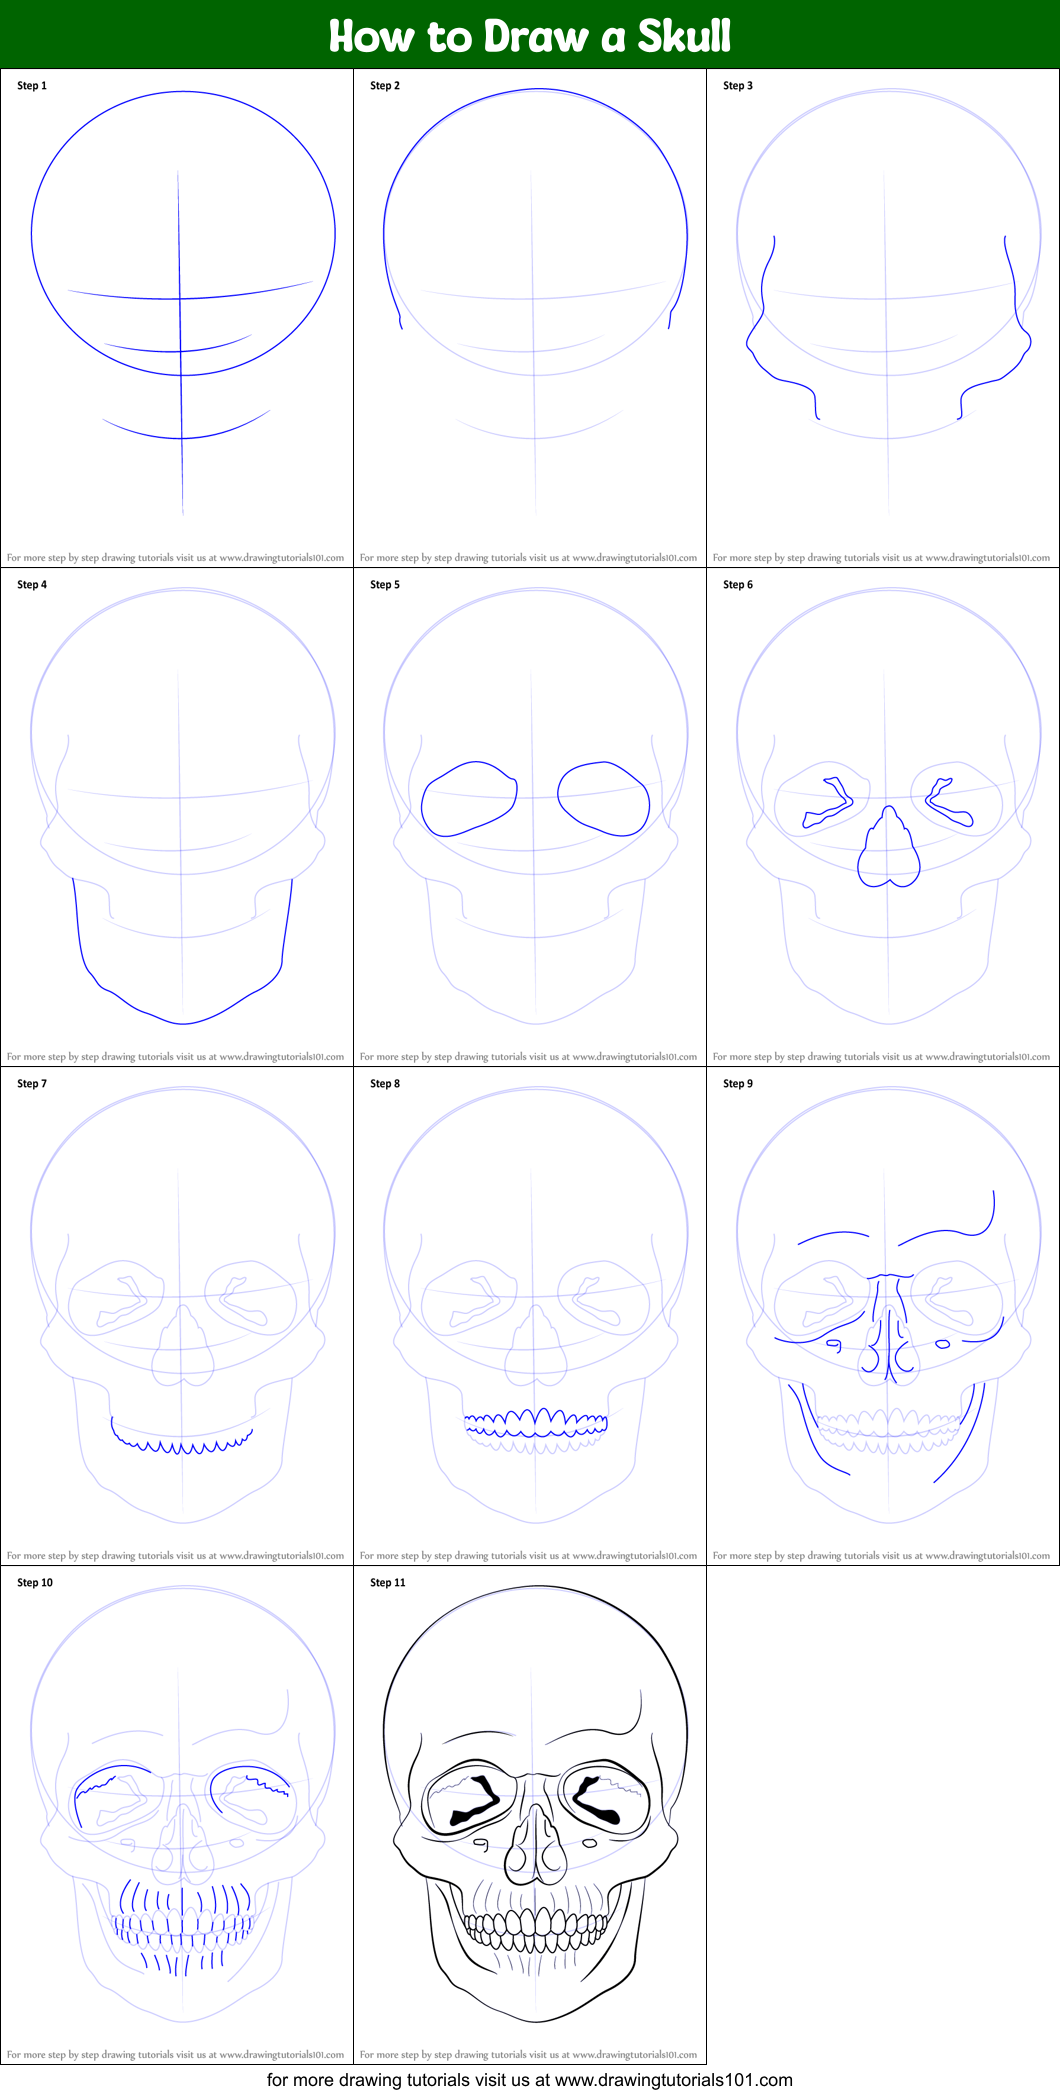 How to Draw a Skull printable step by step drawing sheet